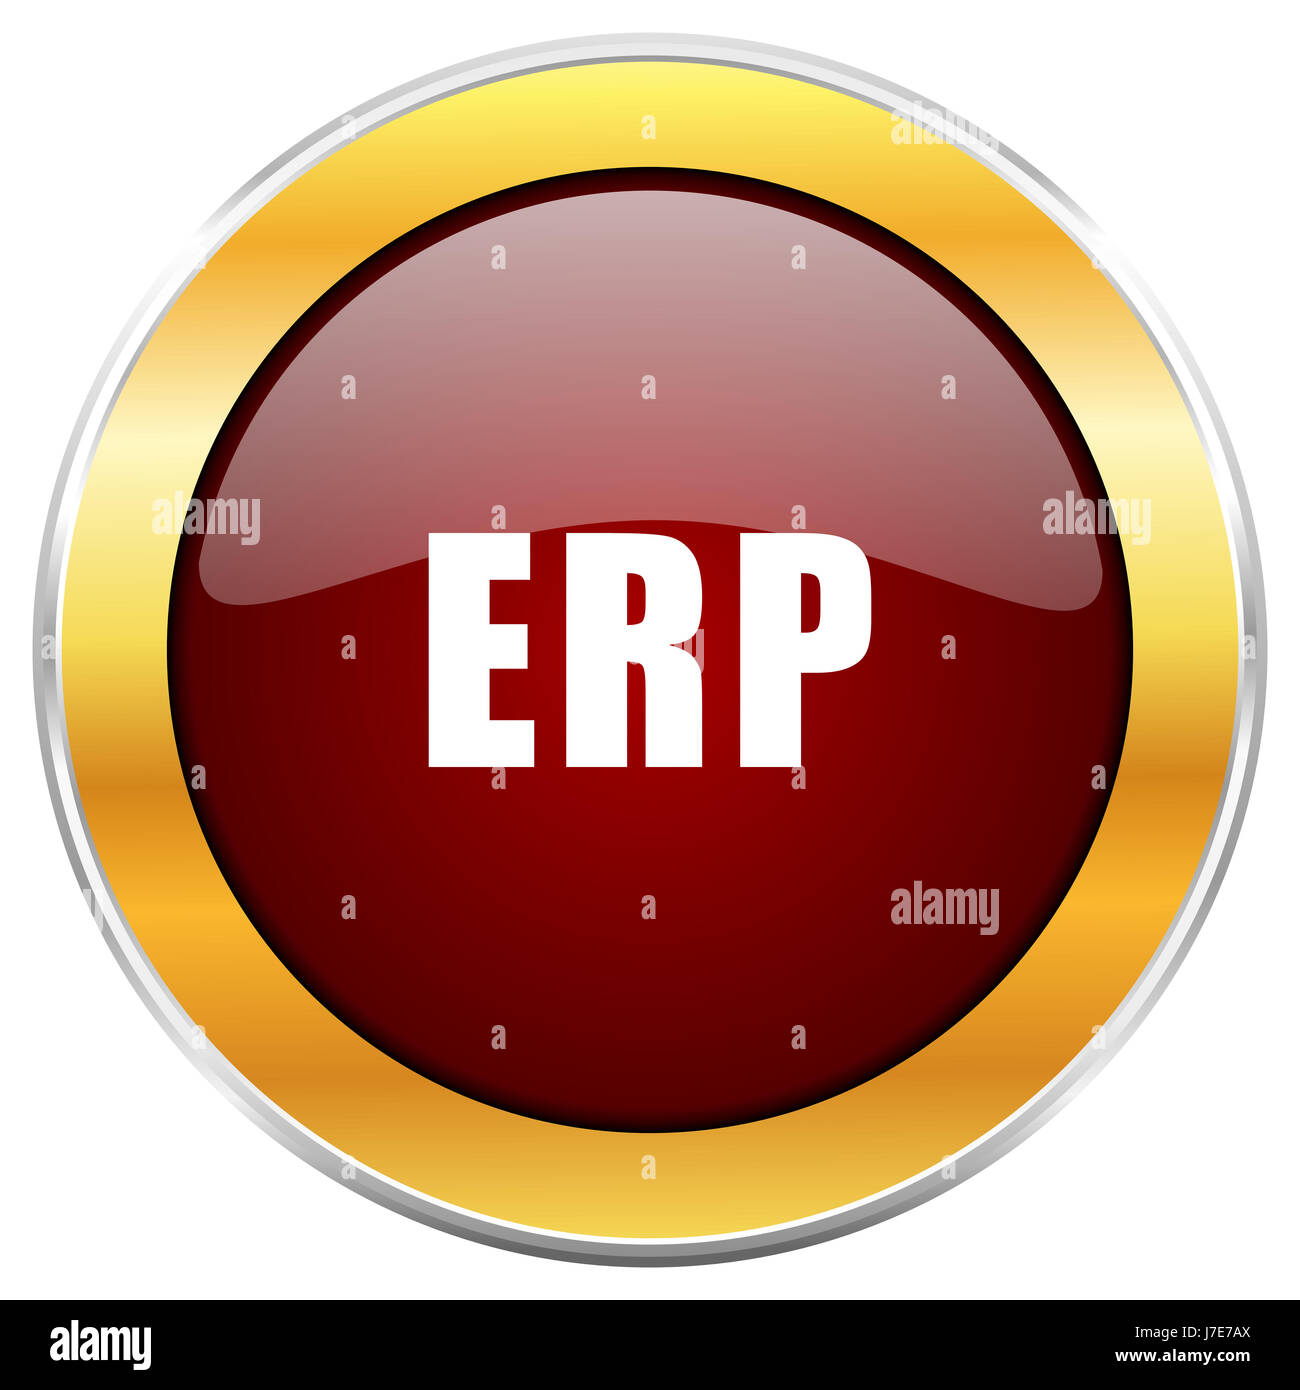 Erp red web icon with golden border isolated on white background. Round glossy button. Stock Photo